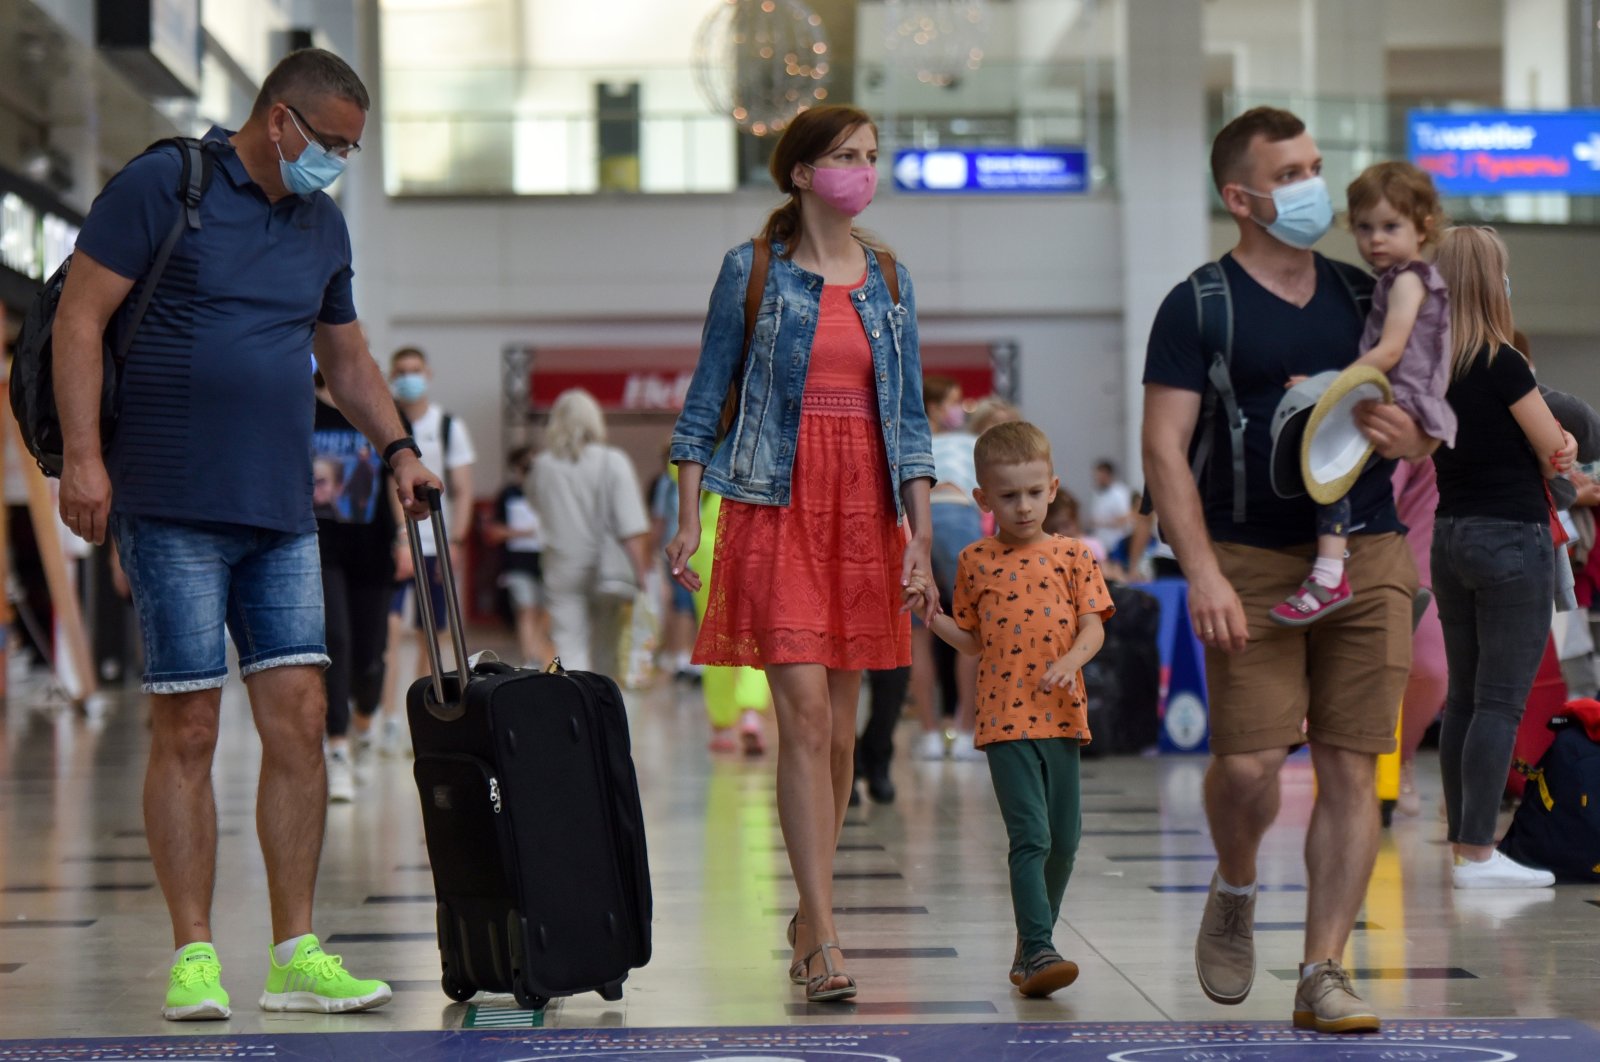 Tourists arrive in the airport in Antalya, southern Turkey, Nov. 22, 2021. (DHA Photo)